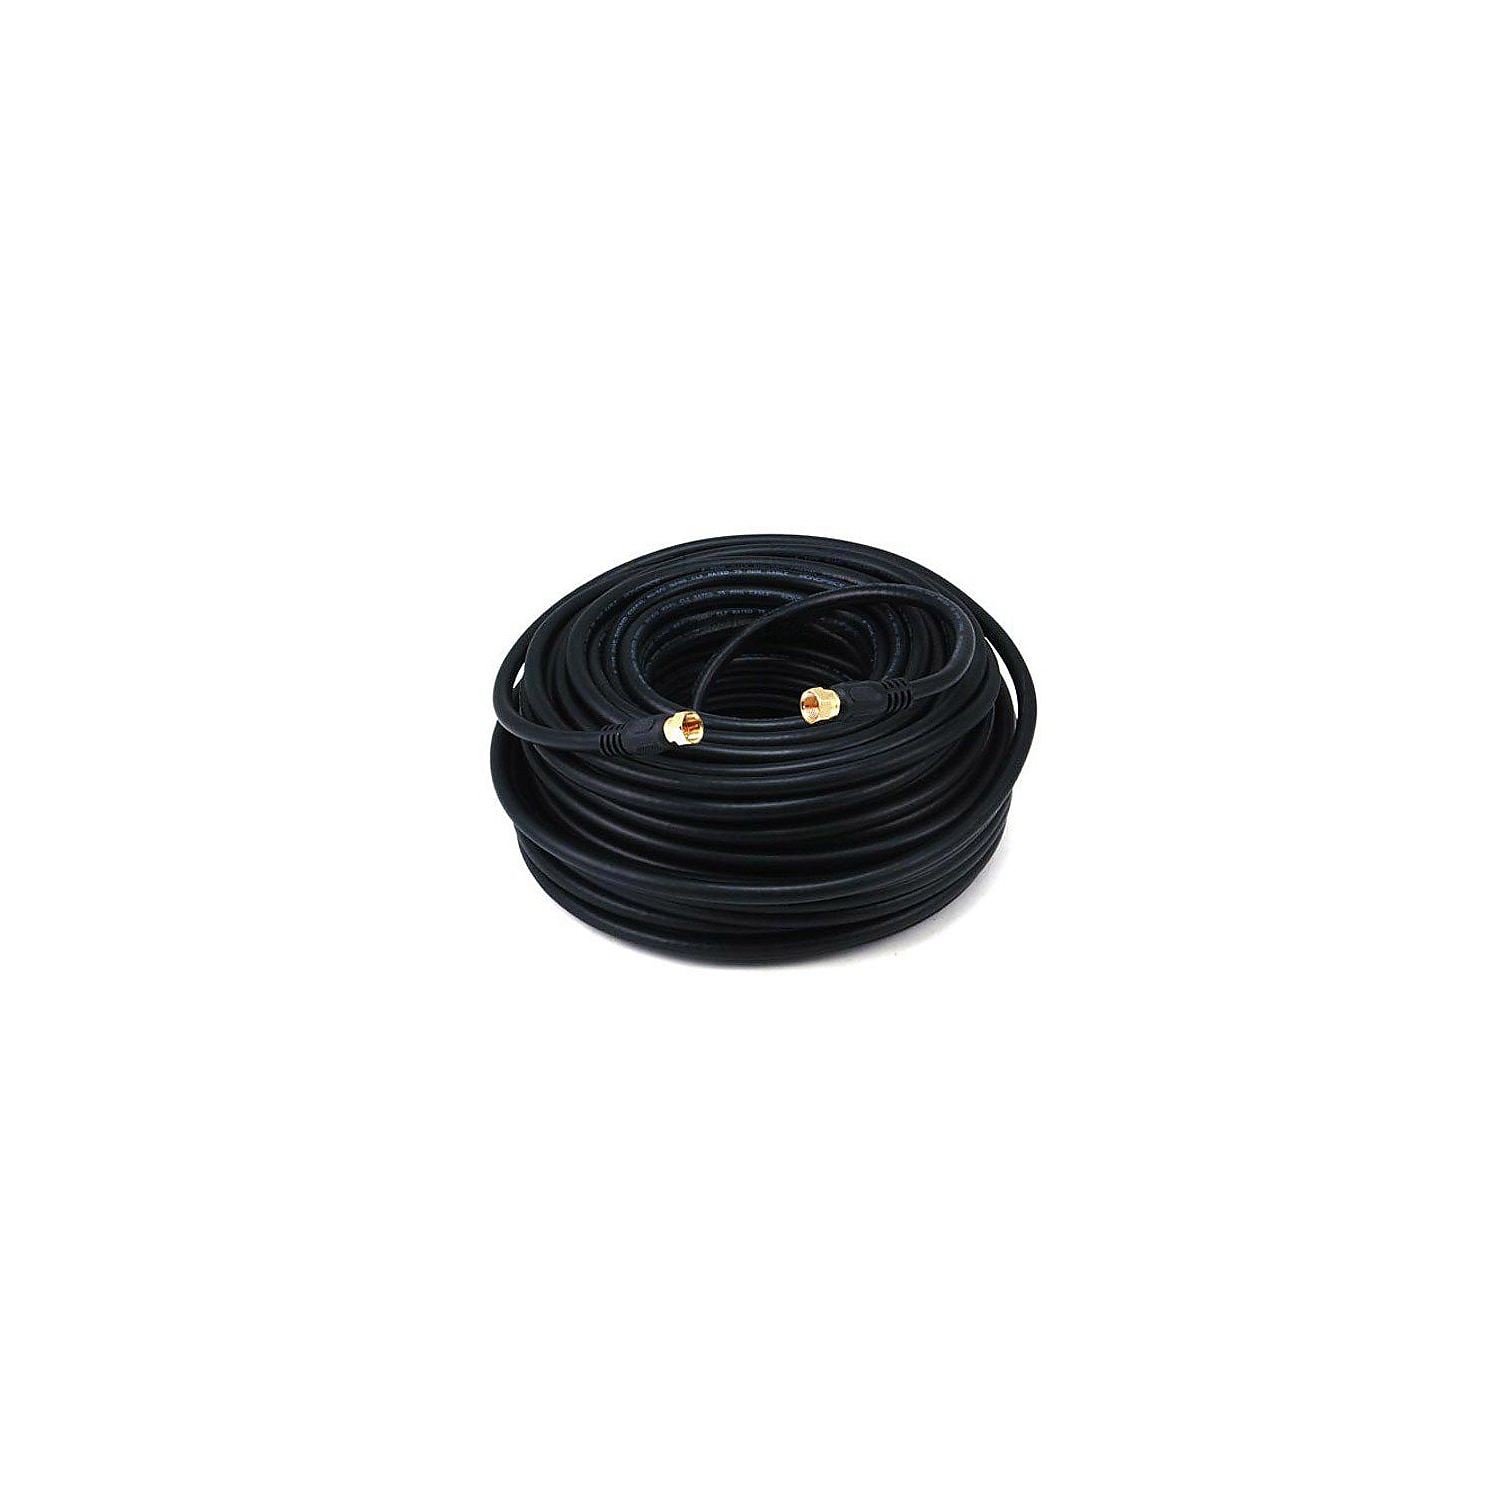 Monoprice 100' CL2 Quad Shielded RG6 F Type 18AWG Coaxial Cable Black 103035 - image 1 of 2